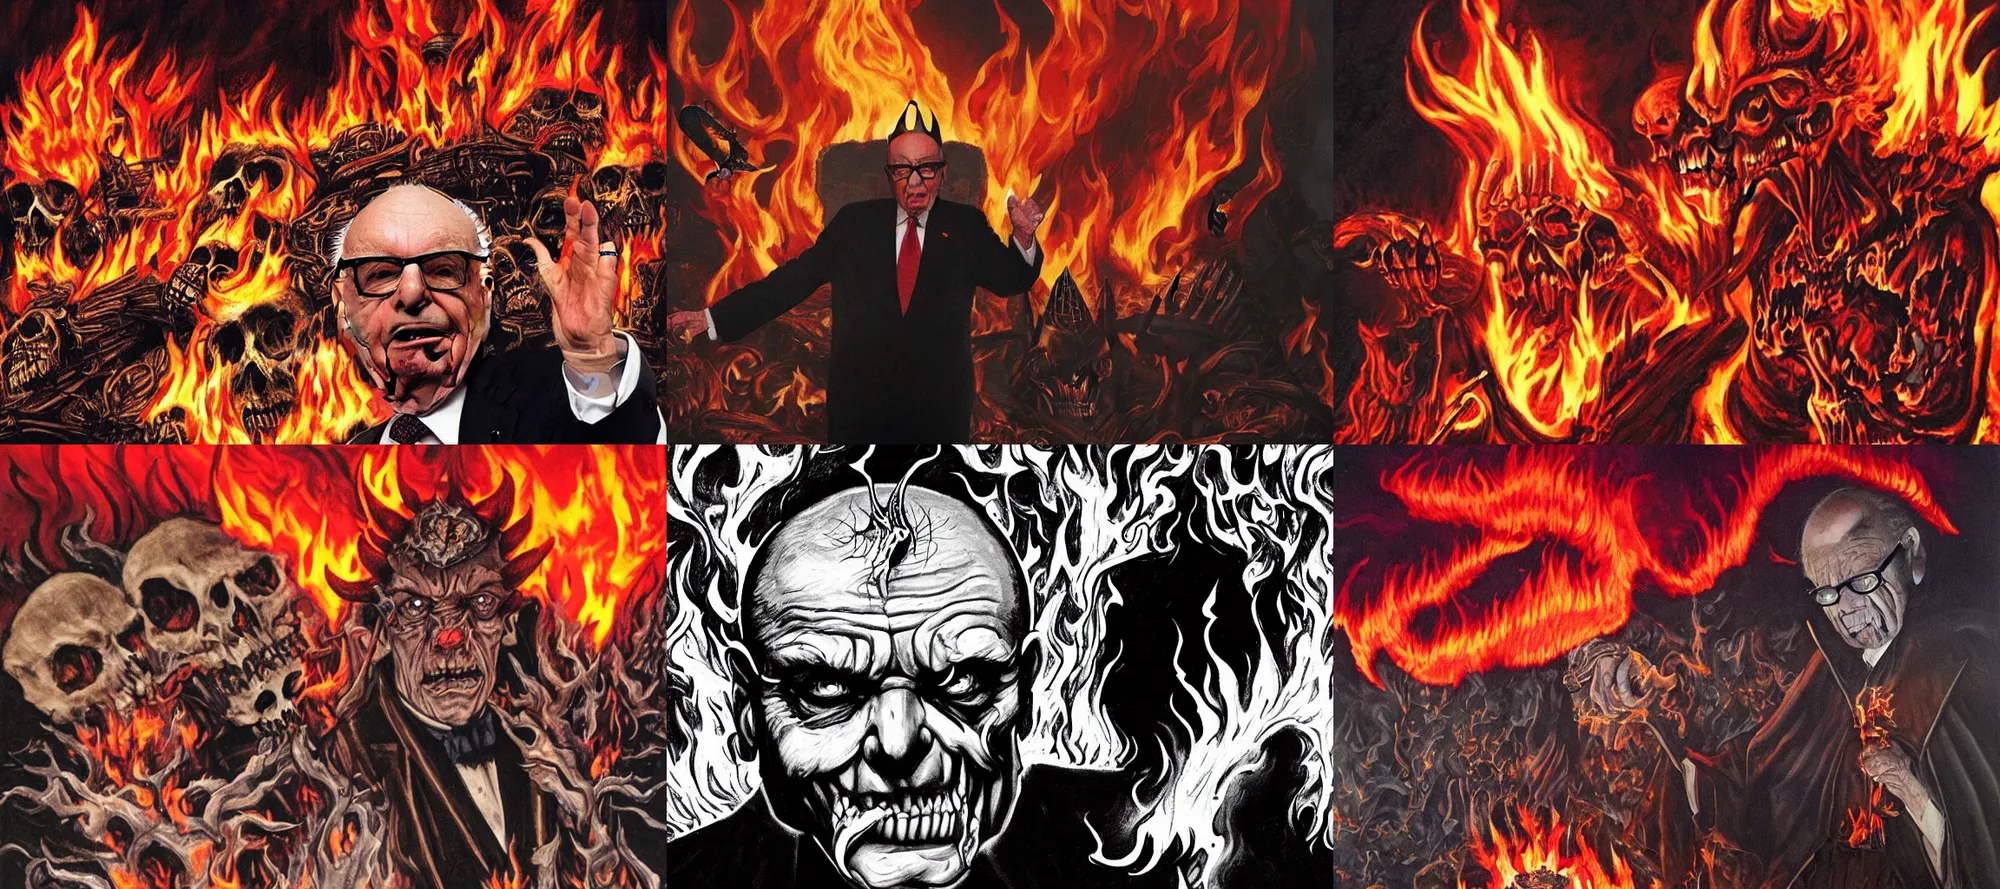 Prompt: Rupert Murdoch as the demonic ruler of the world, flames in the background, fire, smoke, skulls and bones,